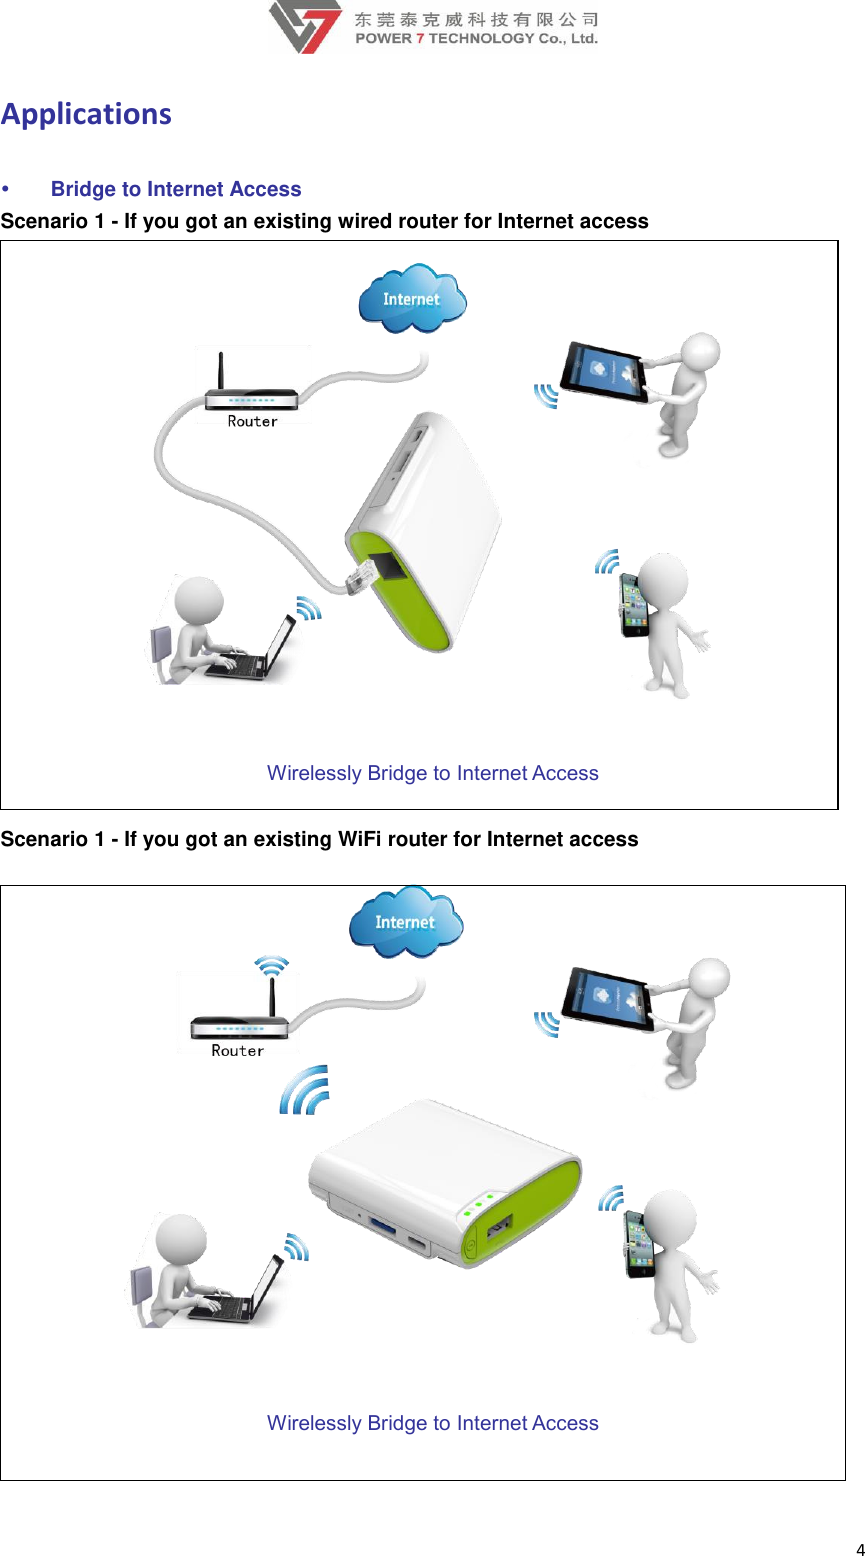    4 Applications  Bridge to Internet Access Scenario 1 - If you got an existing wired router for Internet access   Wirelessly Bridge to Internet Access    Scenario 1 - If you got an existing WiFi router for Internet access  Wirelessly Bridge to Internet Access    